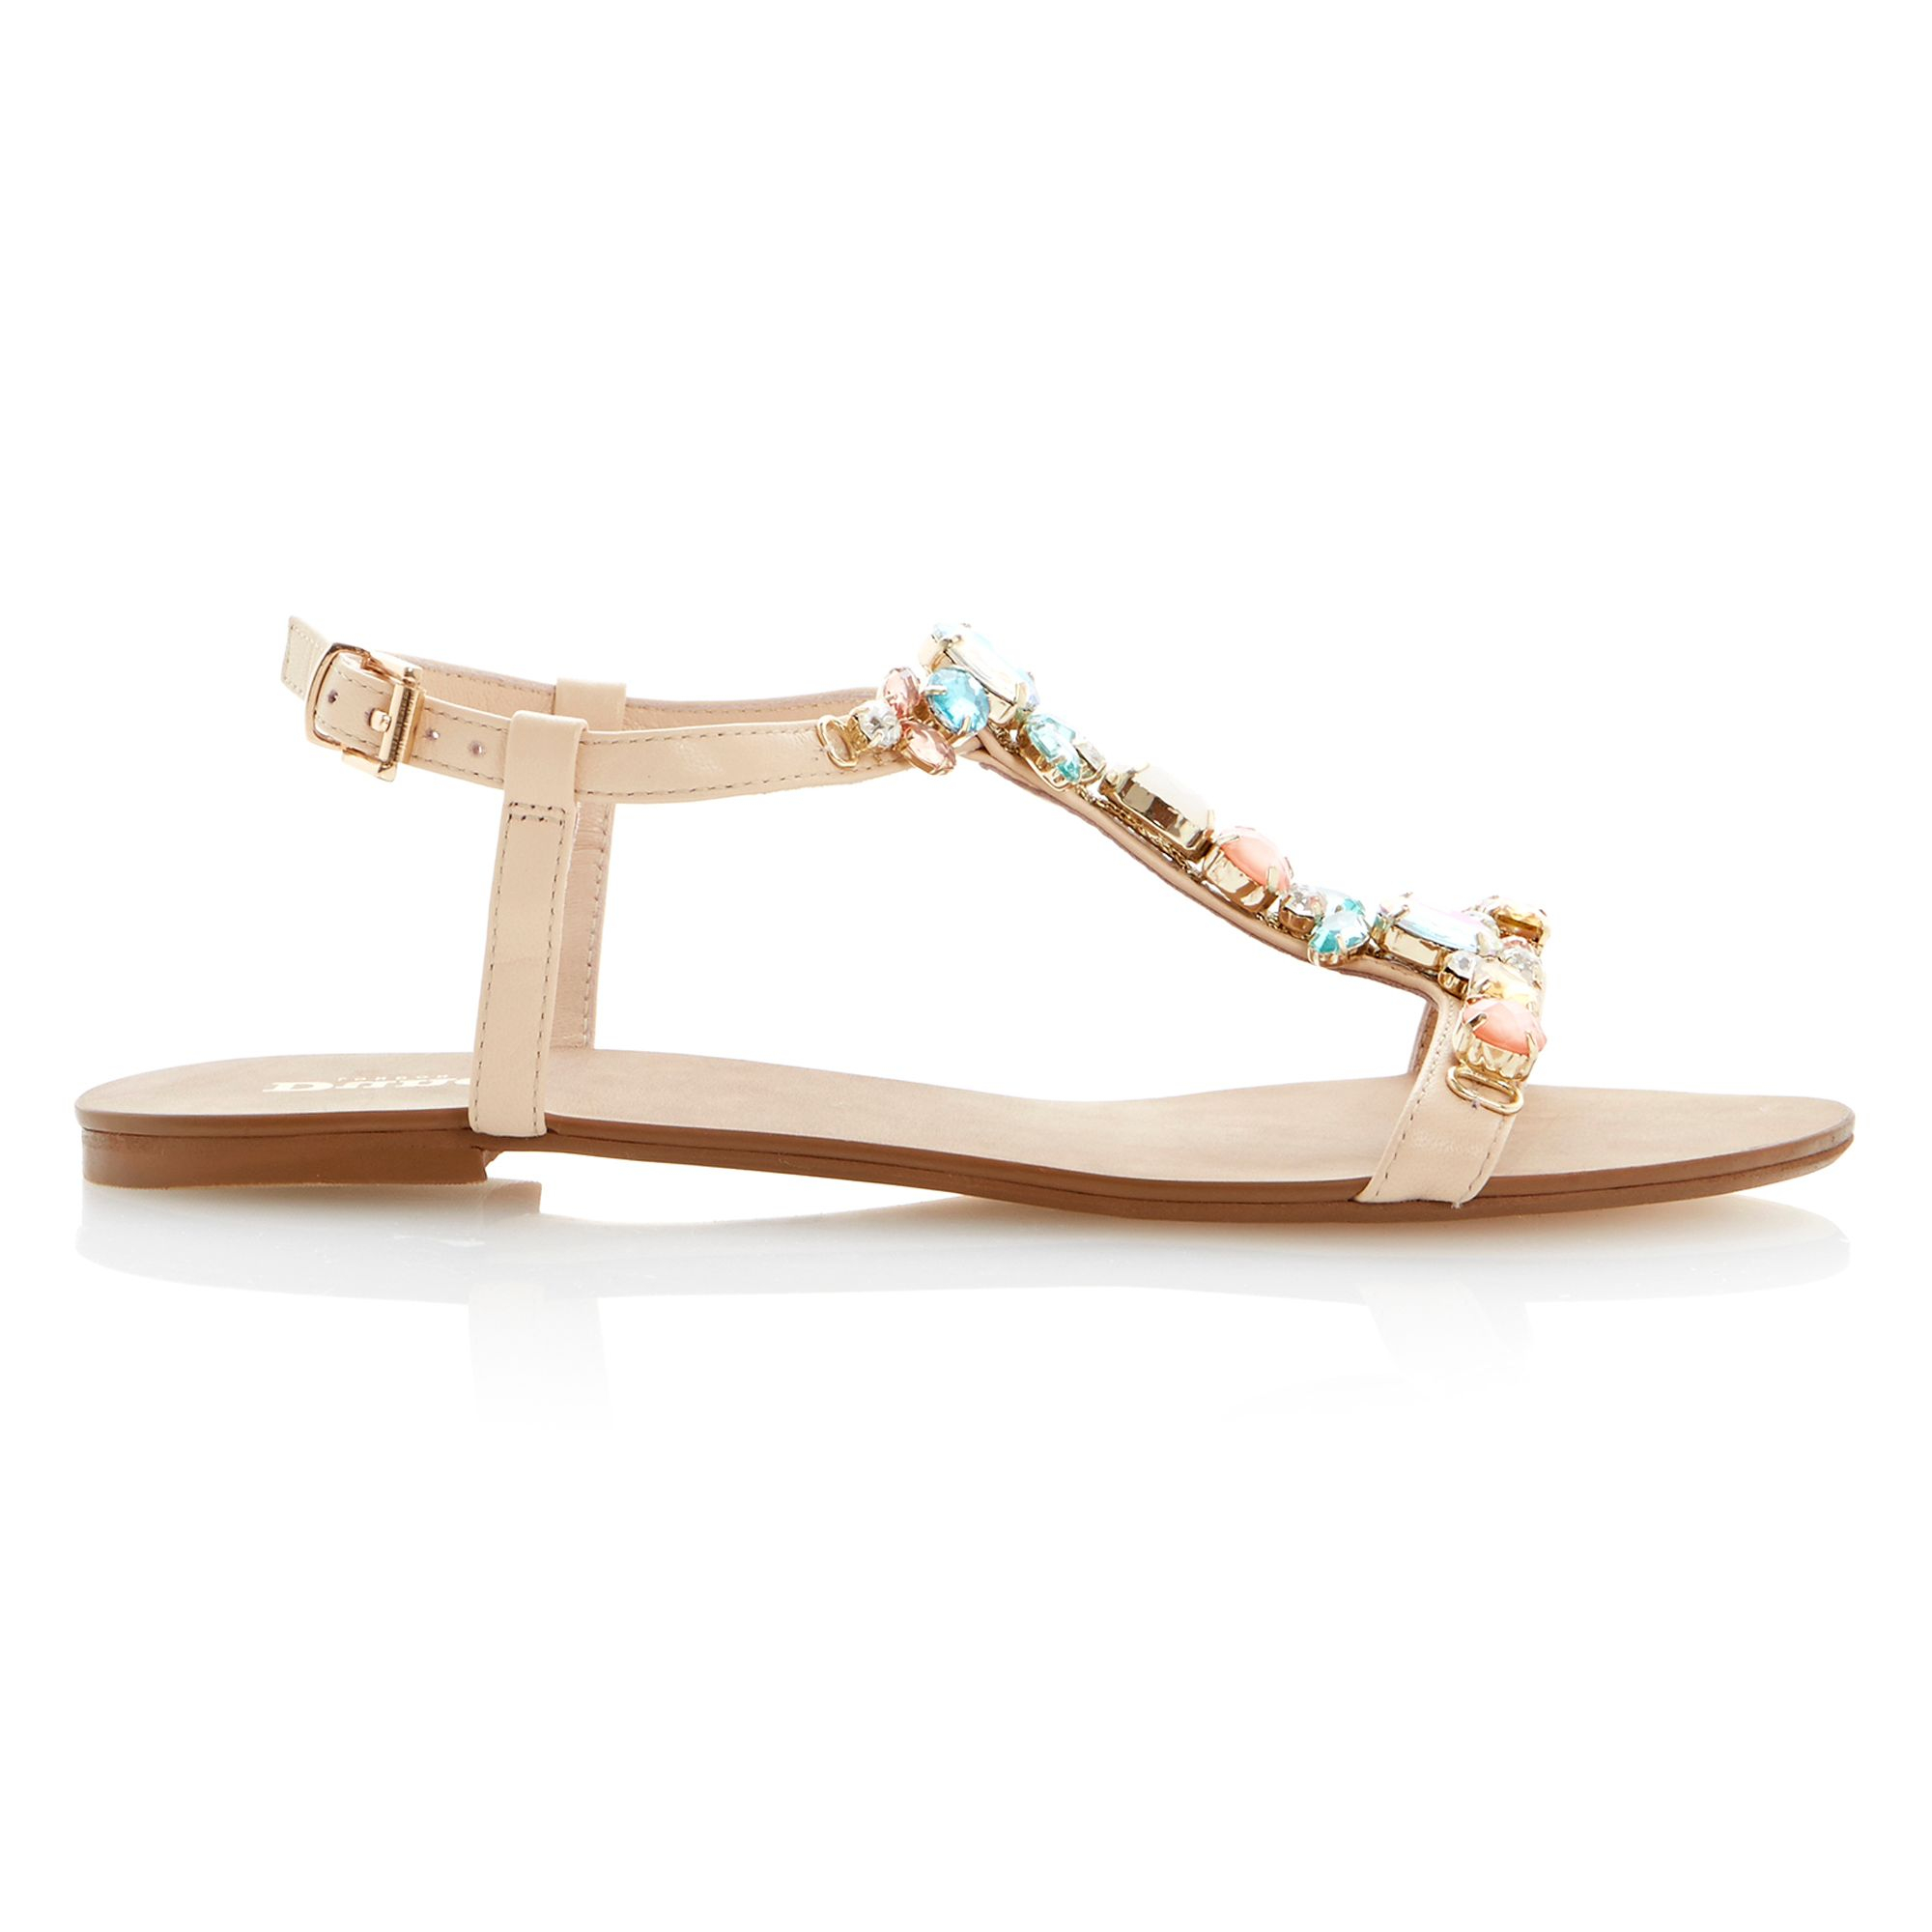 Dune Khloe Leather Flat Buckle Dressy Sandals in Multicolor | Lyst